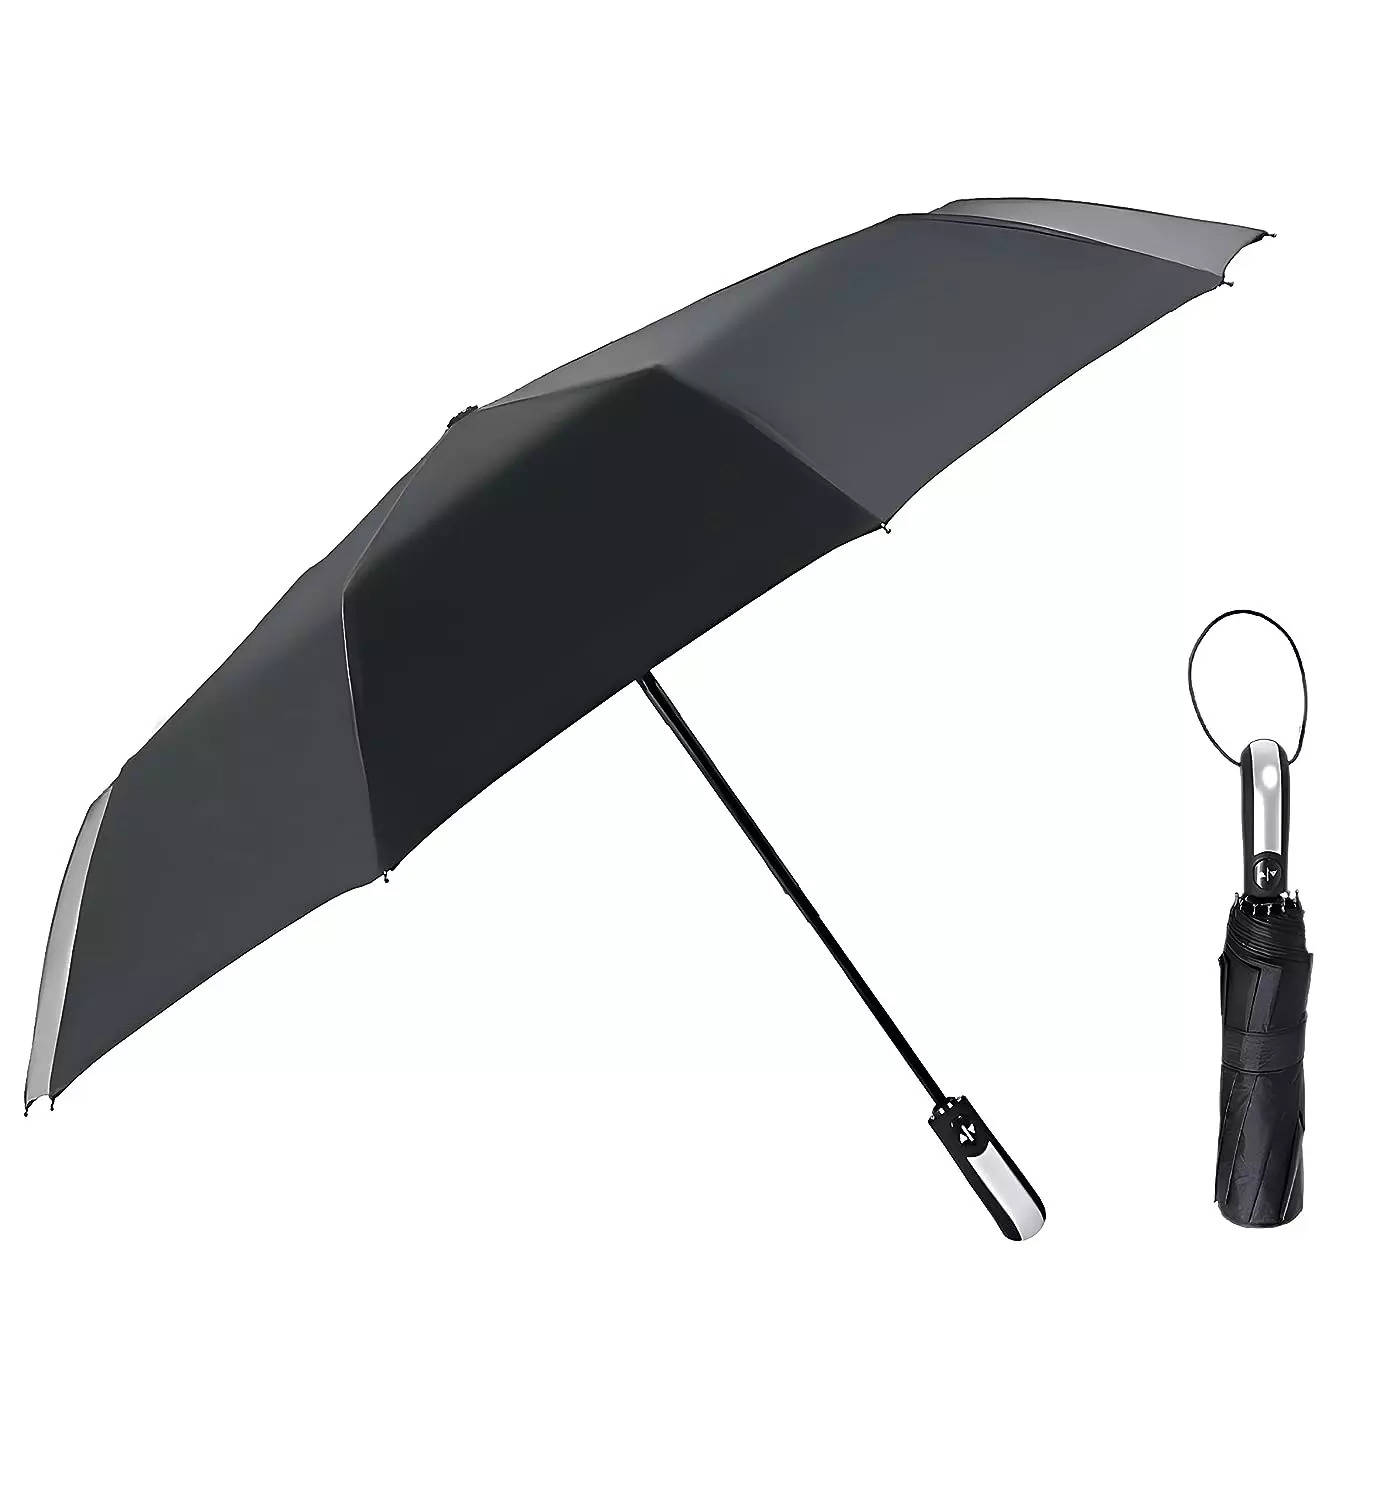 JUKKRE Mini Umbrella with Travel Case - Canopy Diameter 35inch, Small  Travel Umbrella Compact Waterproof Umbrellas for Rain,UV Protection  Suitable for Women/Men Pocket, Purse Manual Opening - Black : Amazon.in:  Bags, Wallets